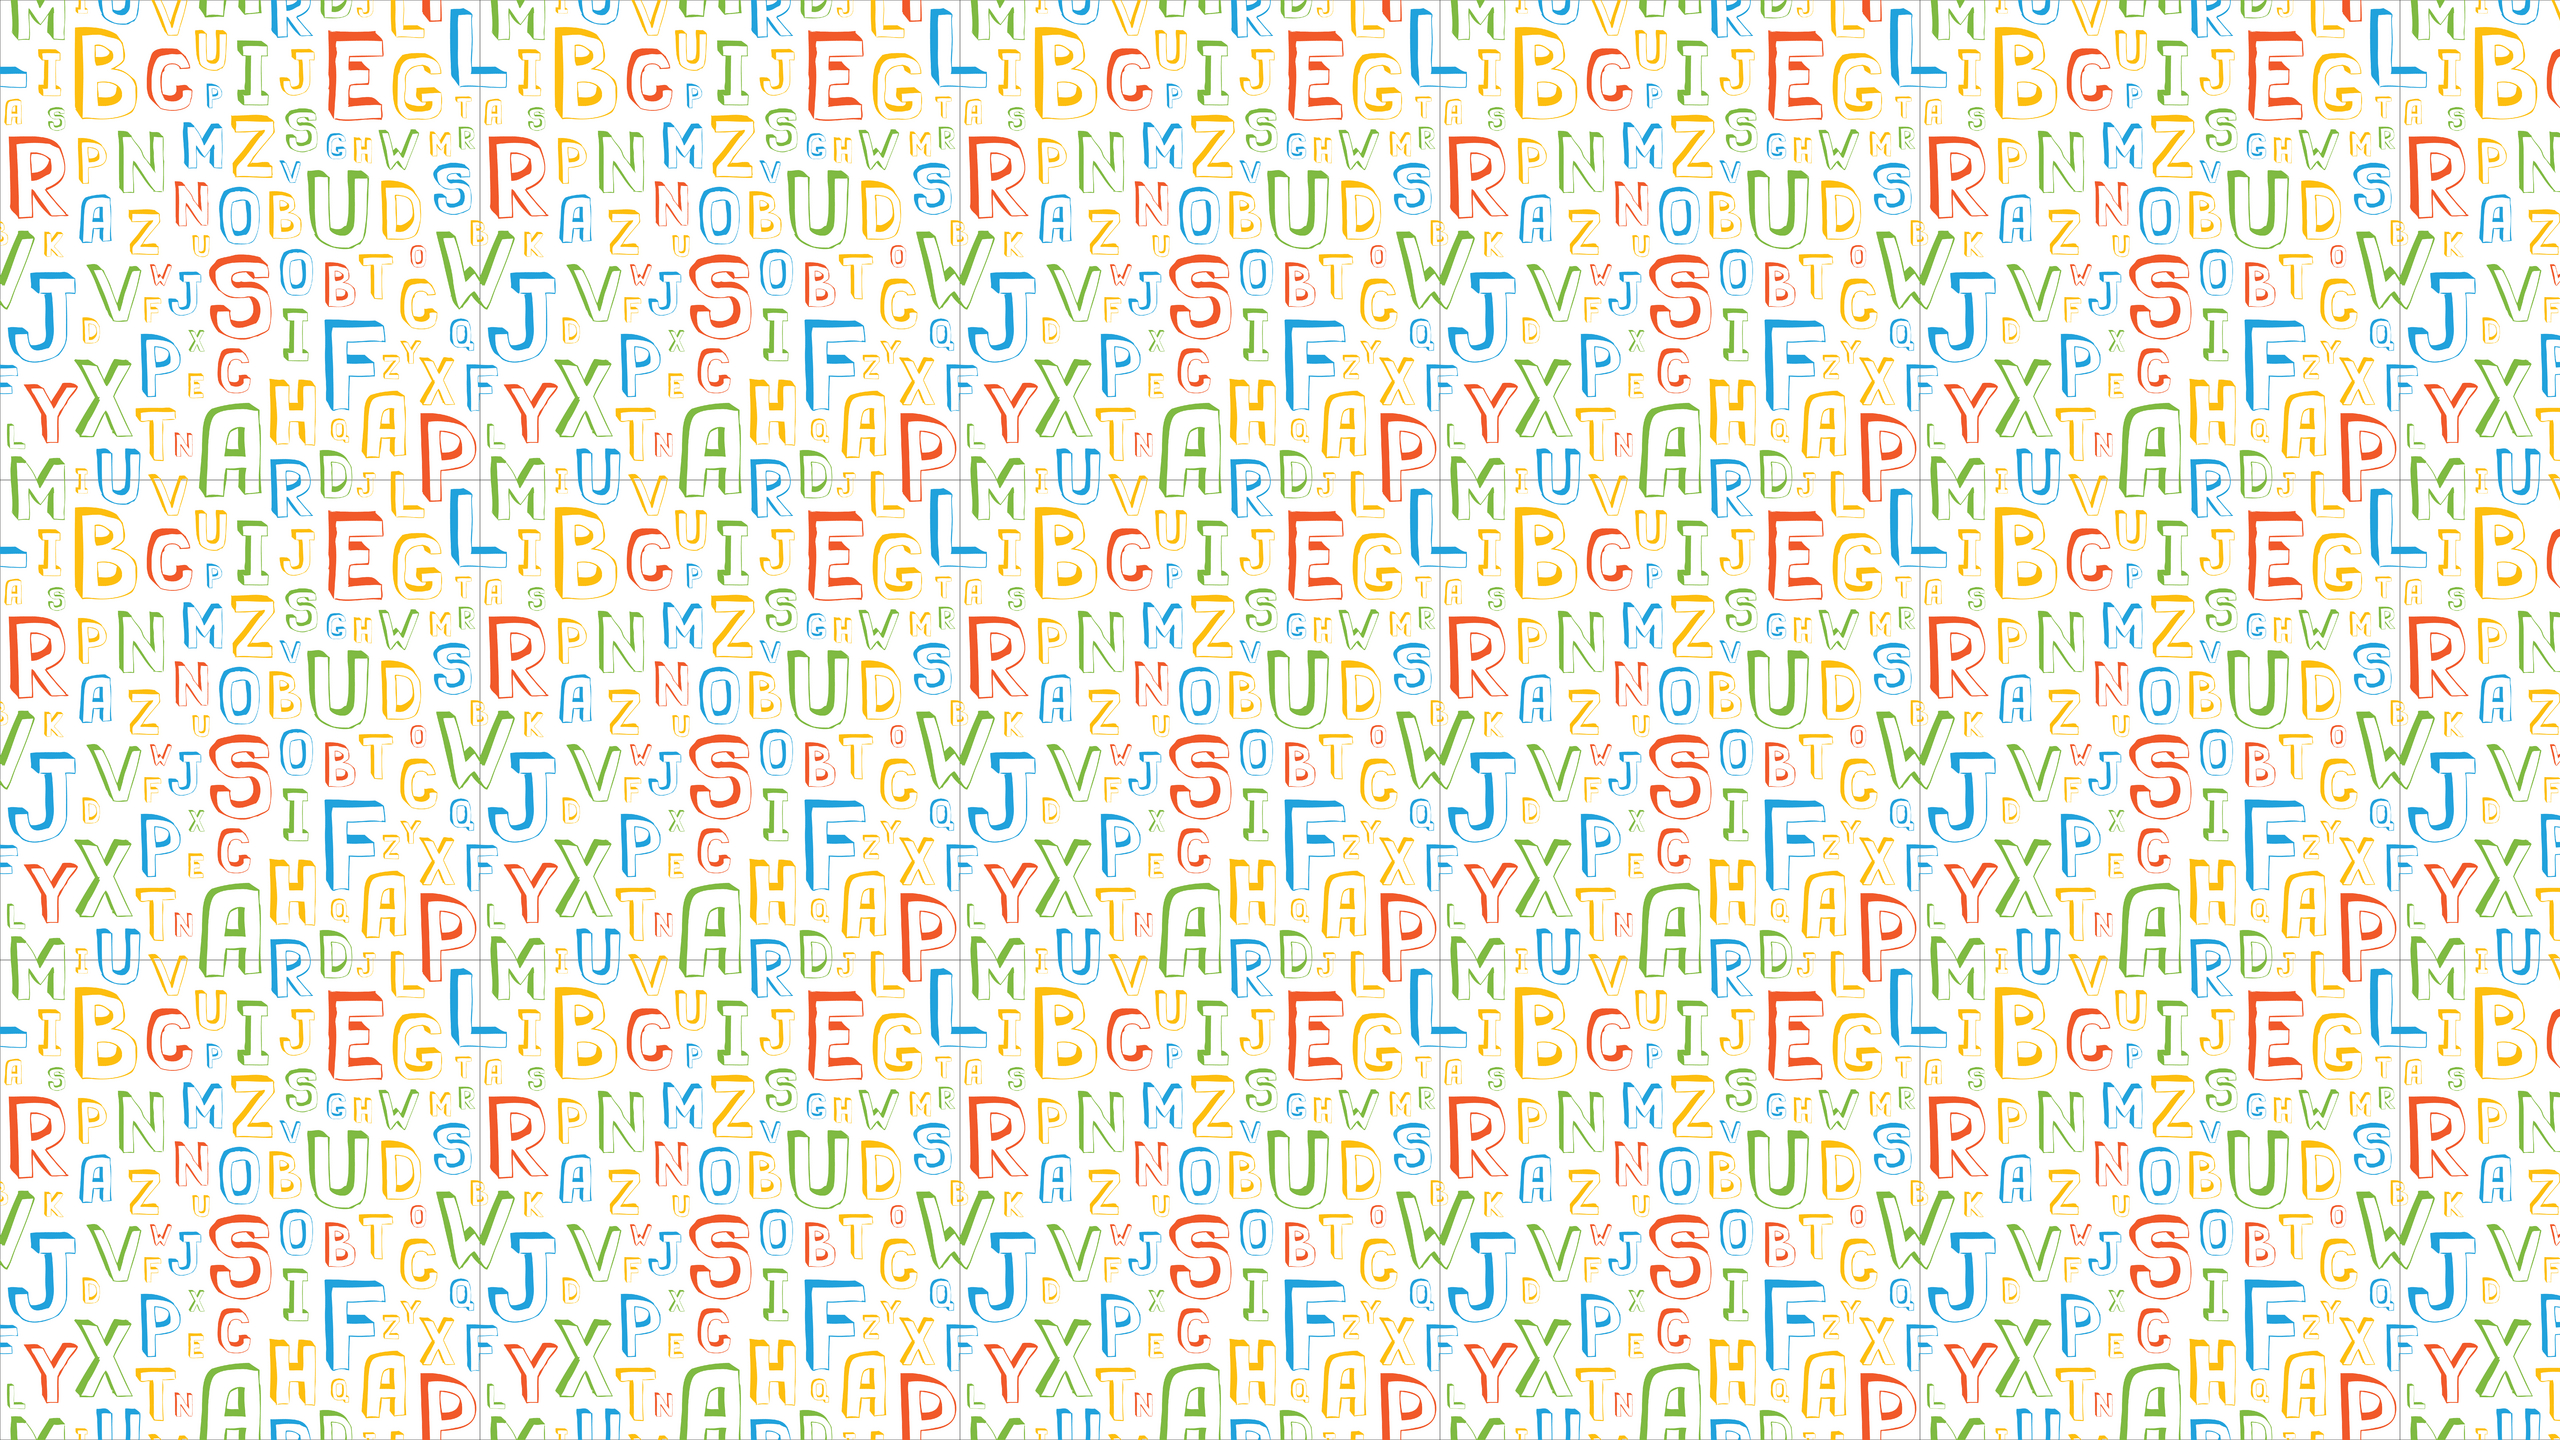 This The Alphabet Desktop Wallpaper Is Easy Just Save